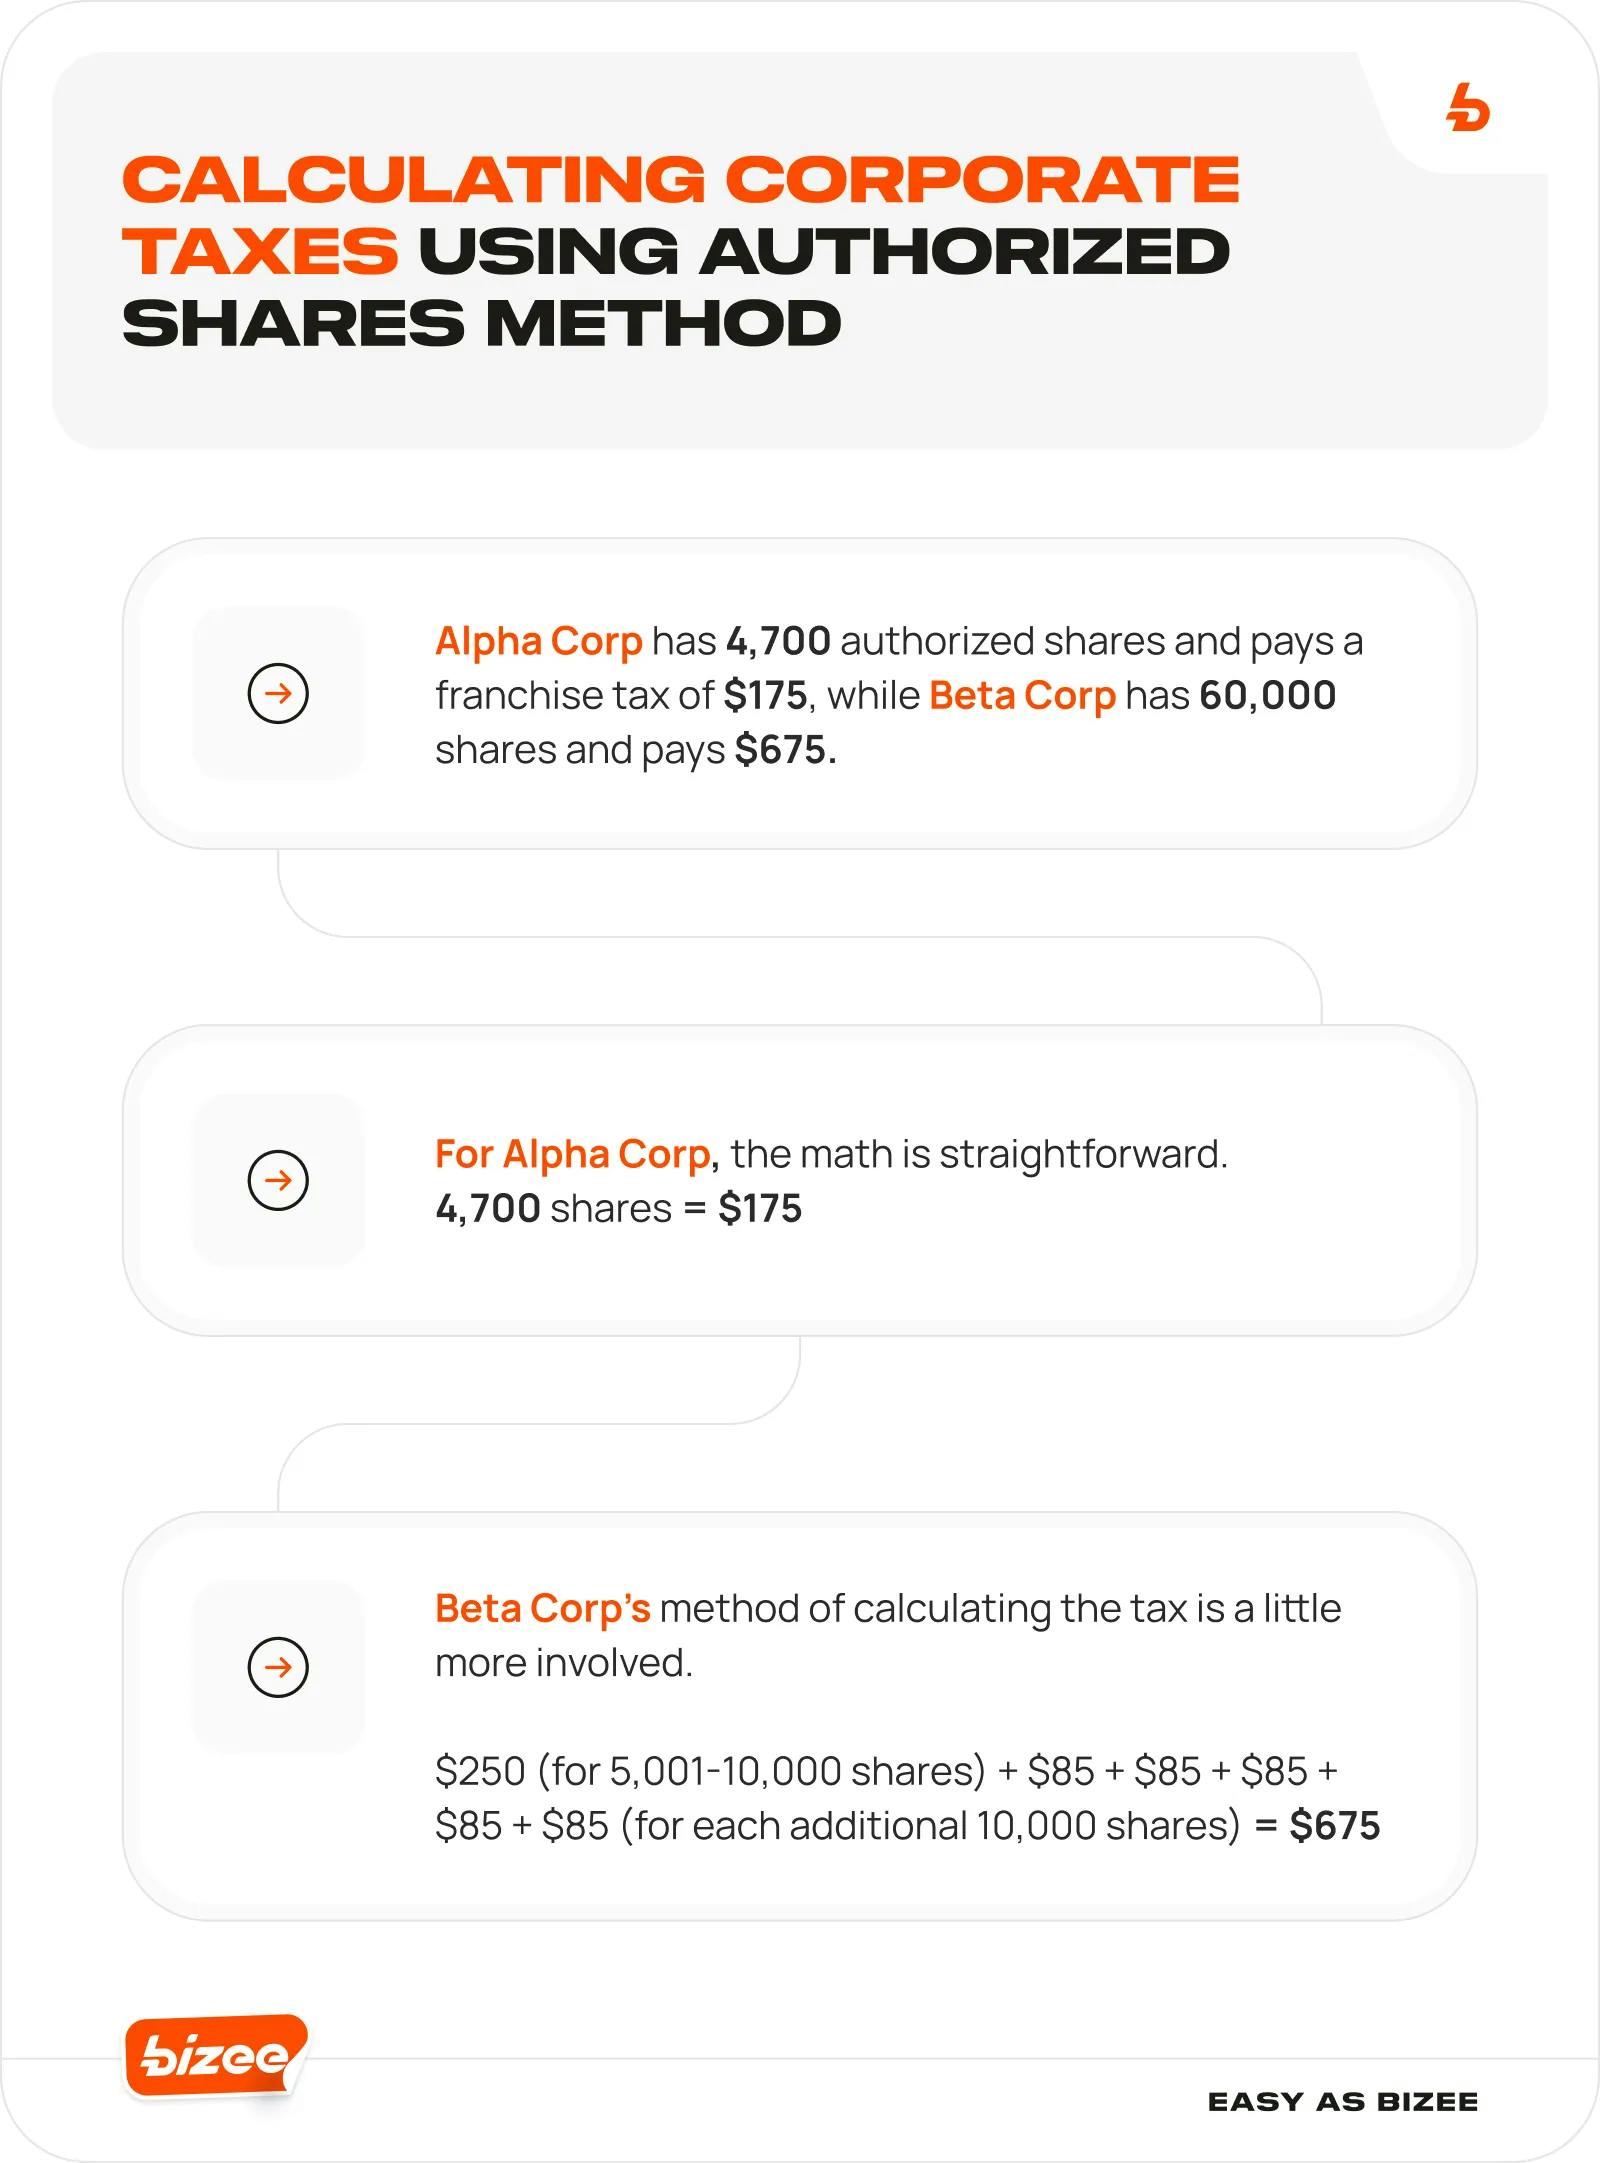 Calculating Corporate Taxes Using Authorized Shares Method